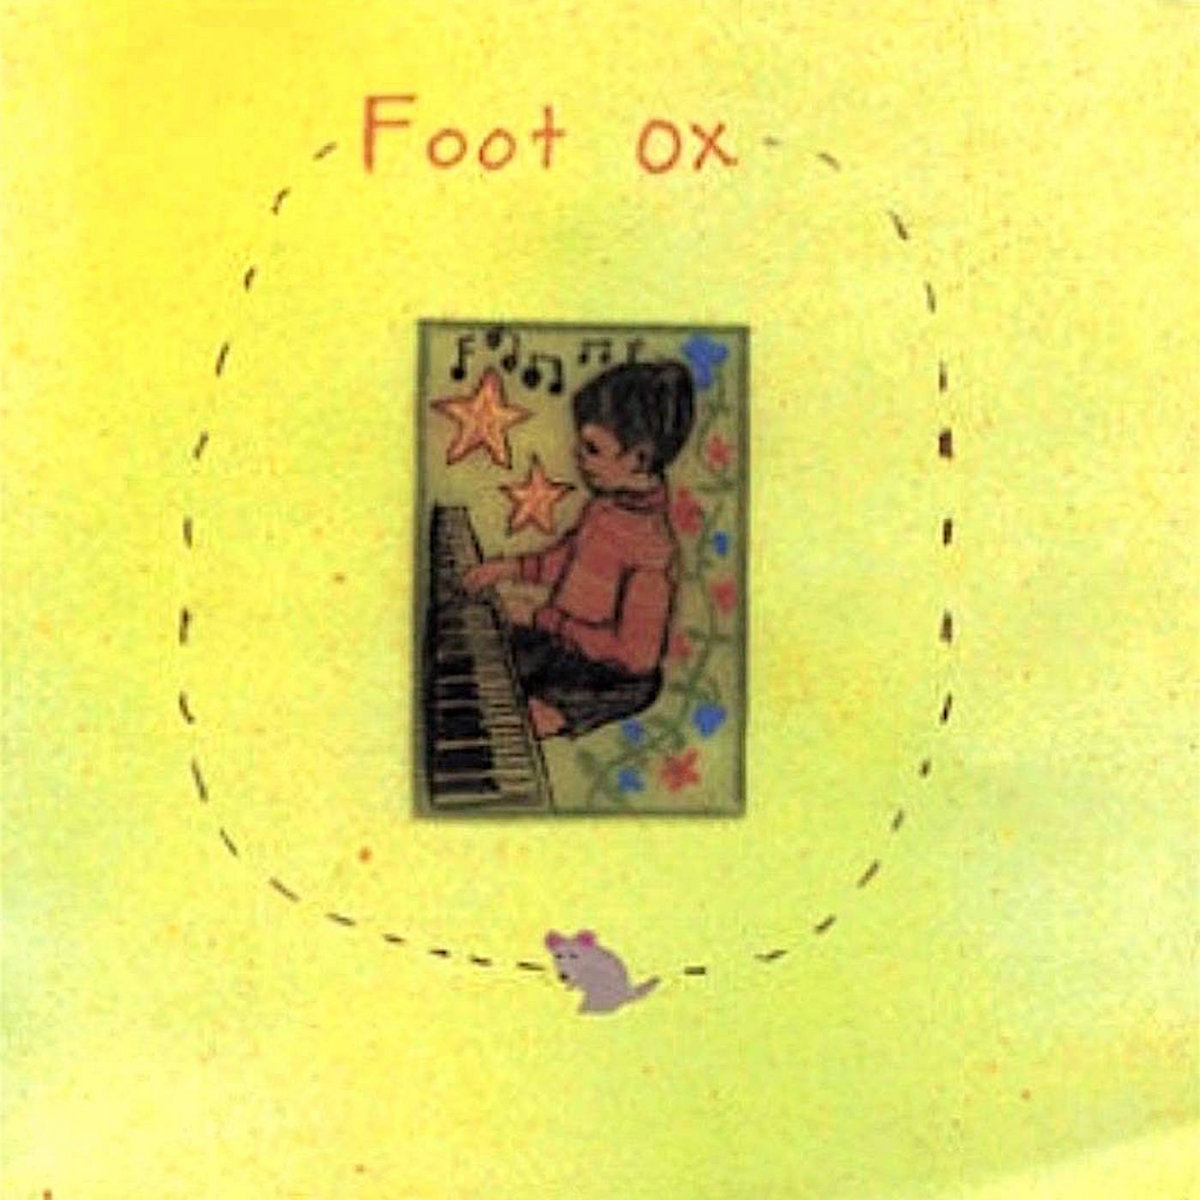 THE ALBUM COVER FOR GHOST BY FOOT OX.